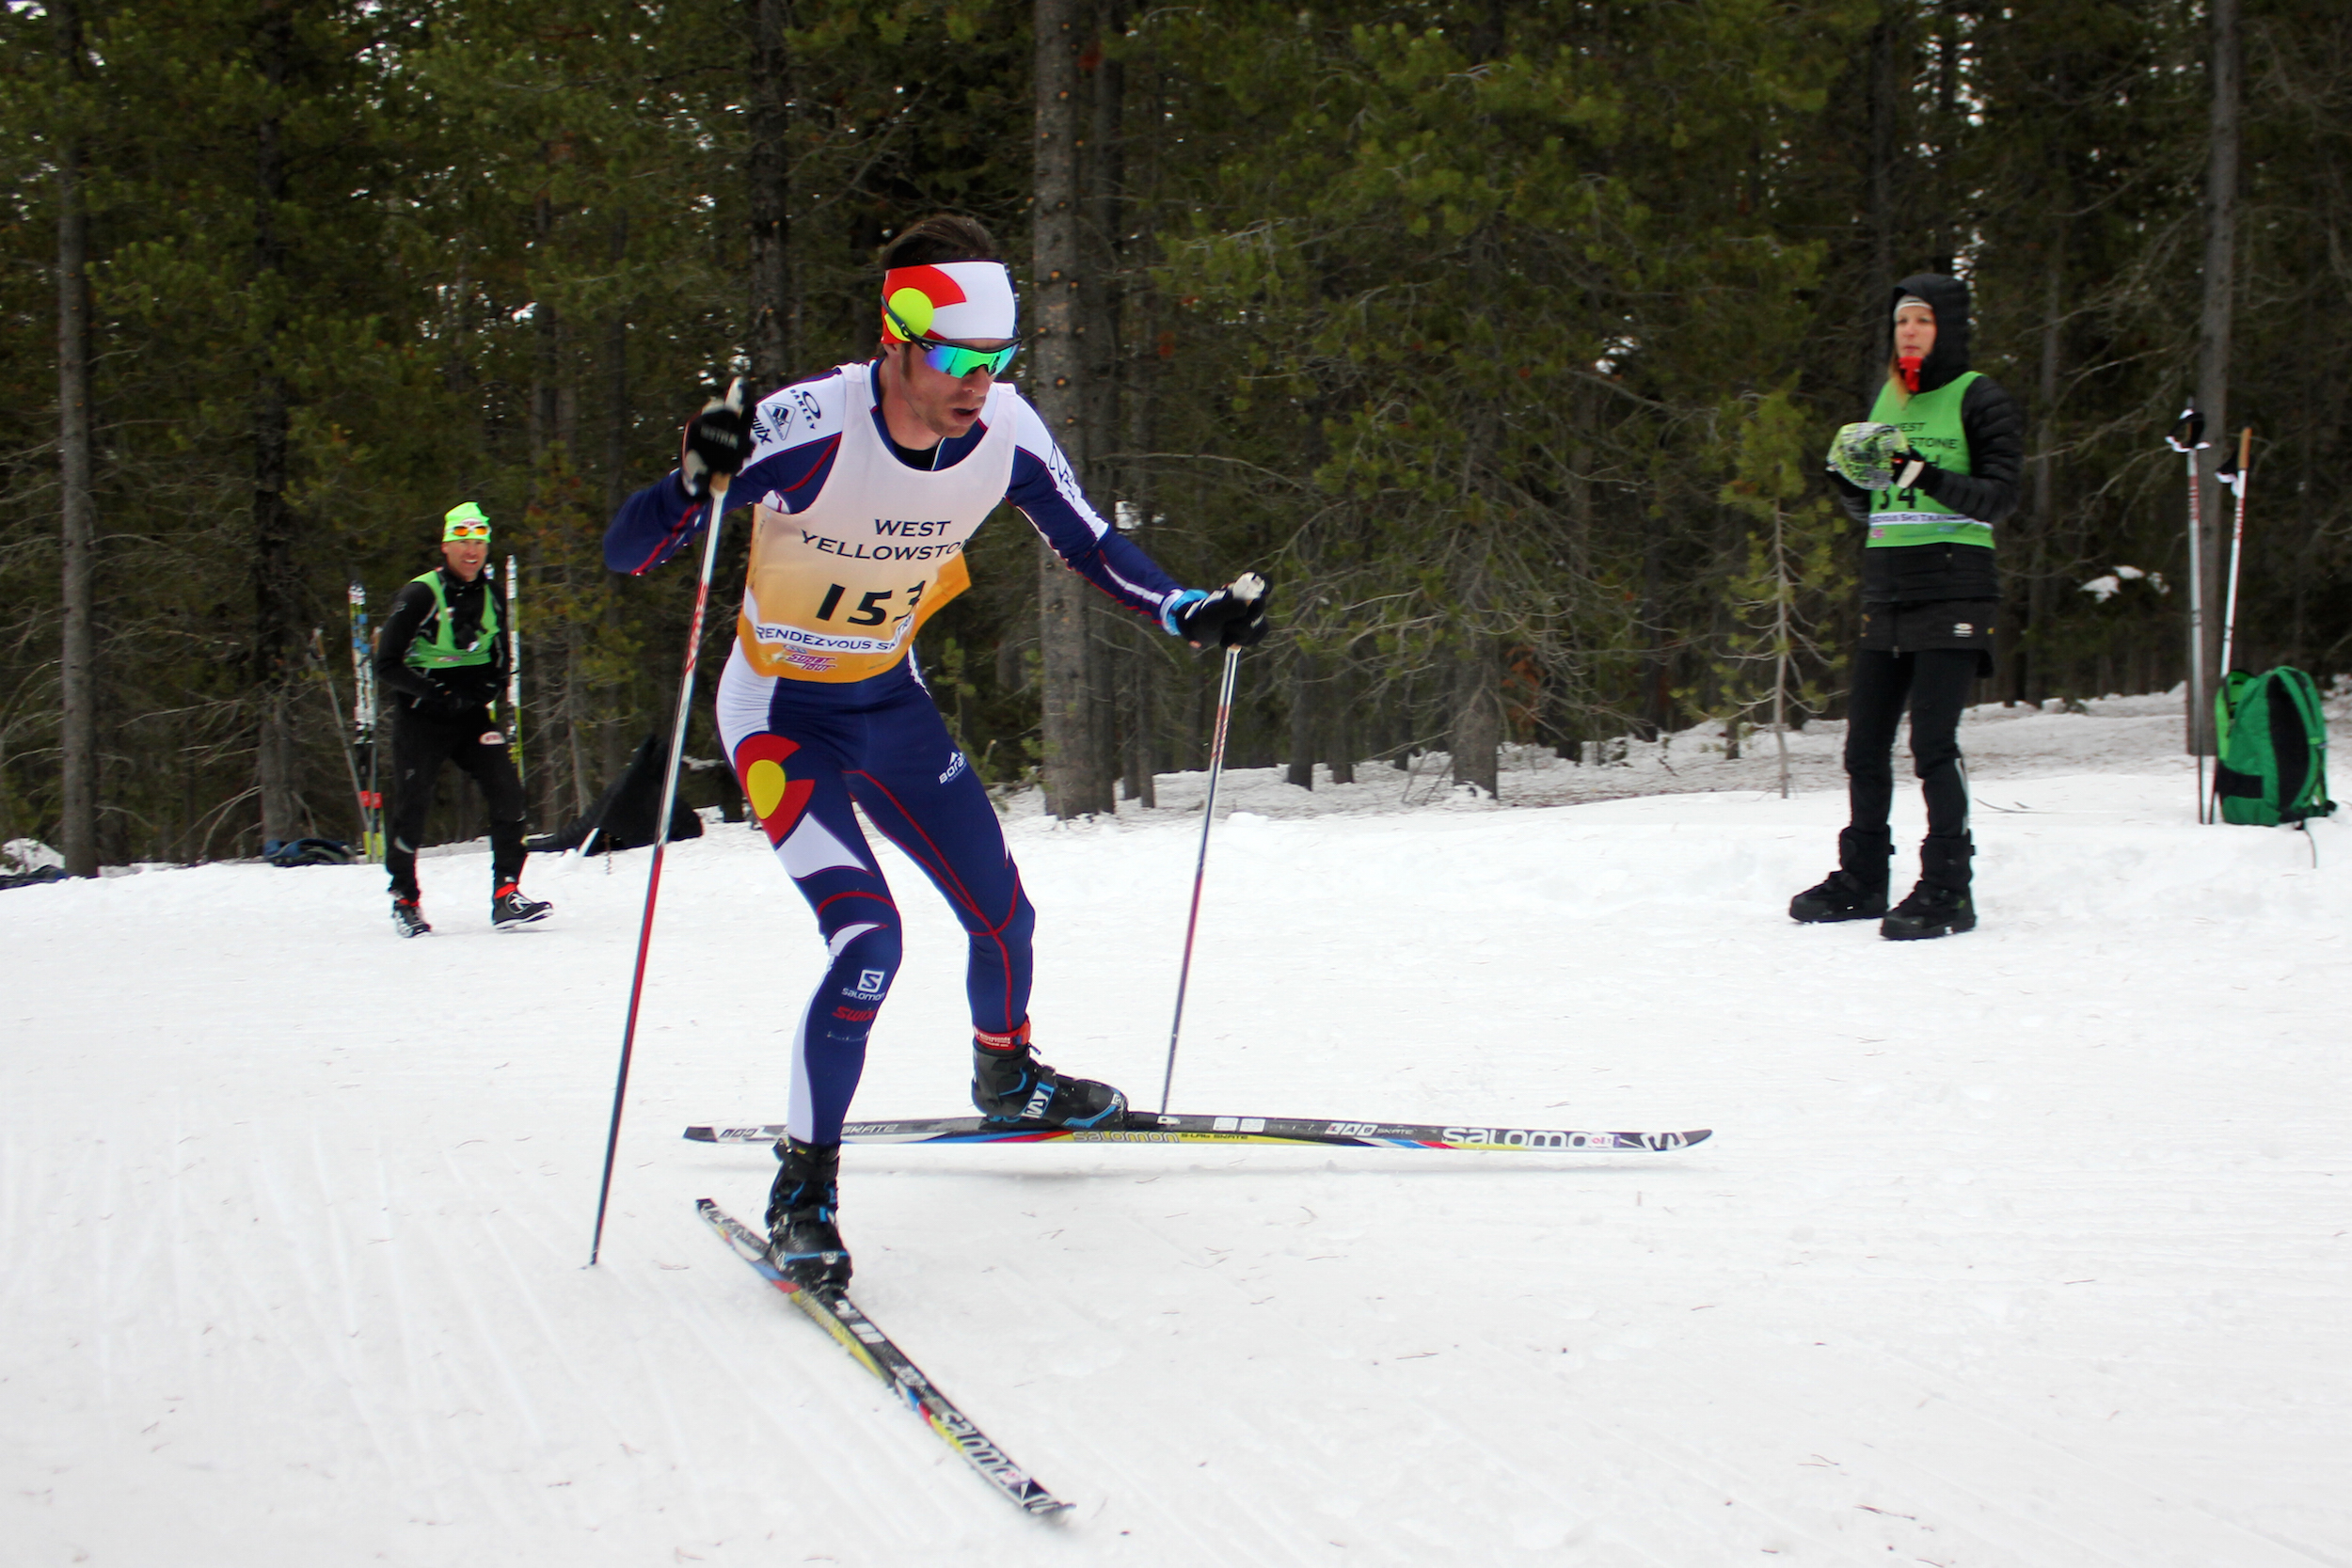 Tad Elliot (SSCV) progressed from 9th to 5th over the course of three laps in Saturday's SuperTour 15 k freestyle in West Yellowstone, Mont. 